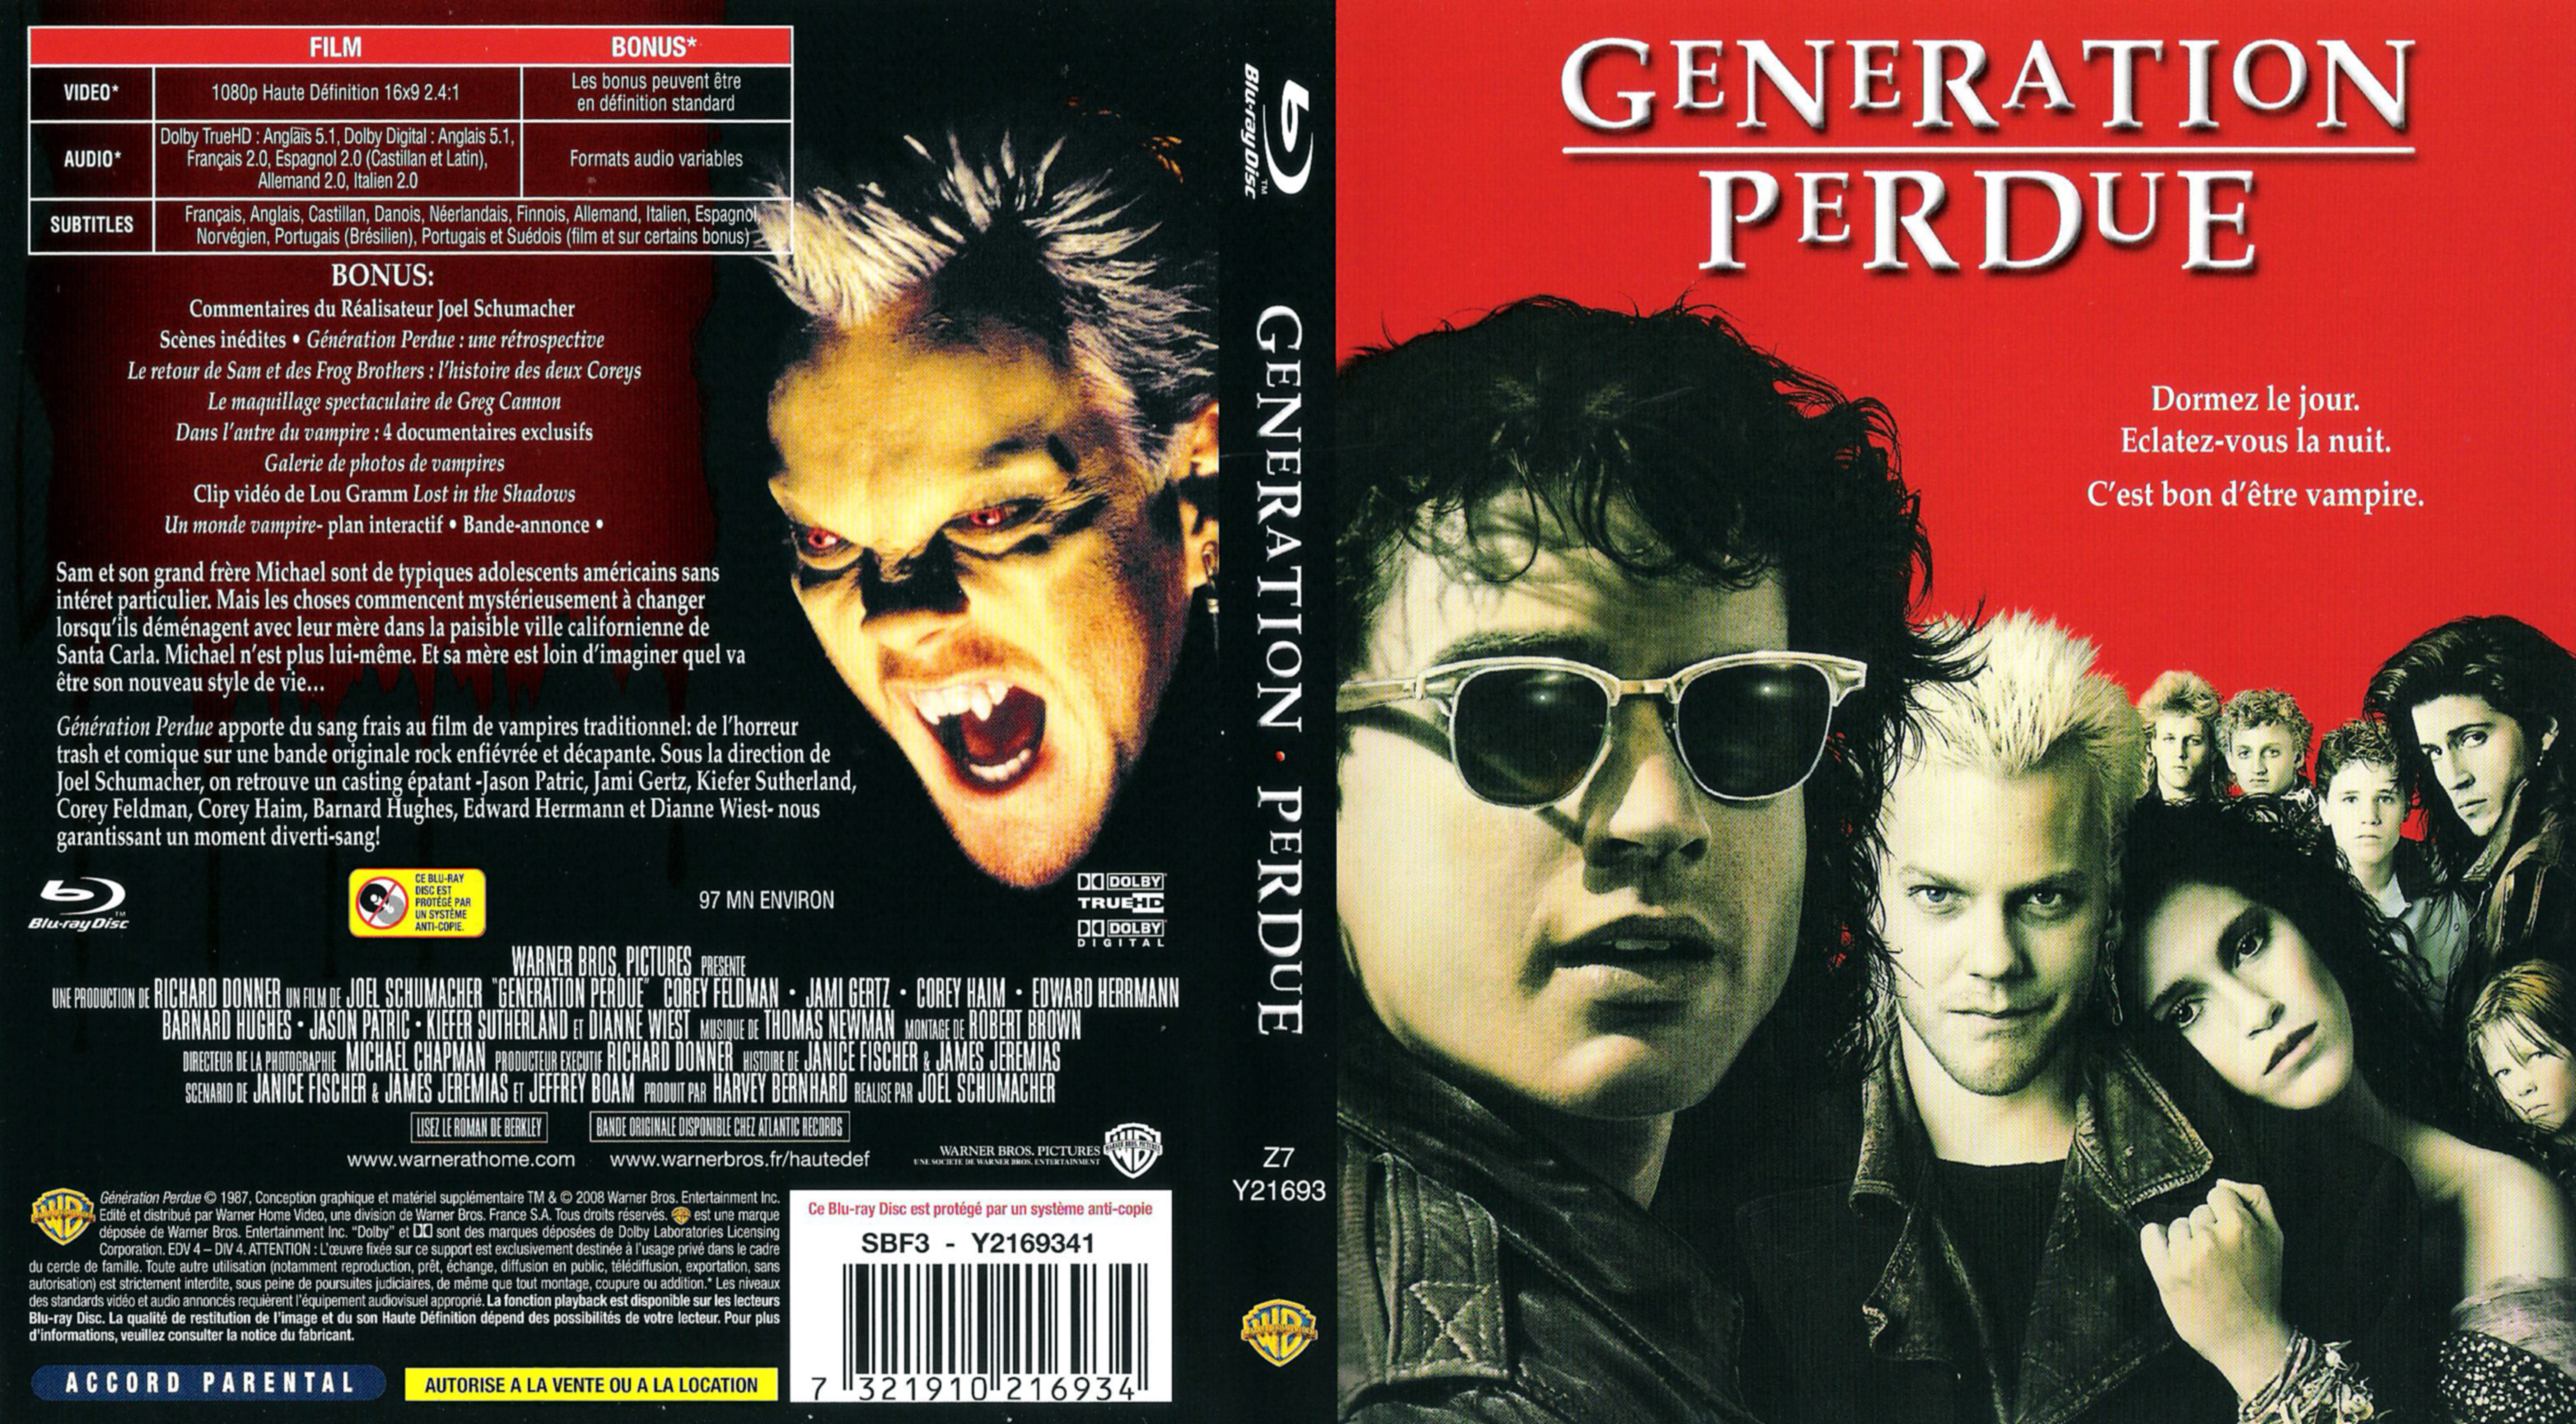 Jaquette DVD Generation perdue (BLU-RAY)